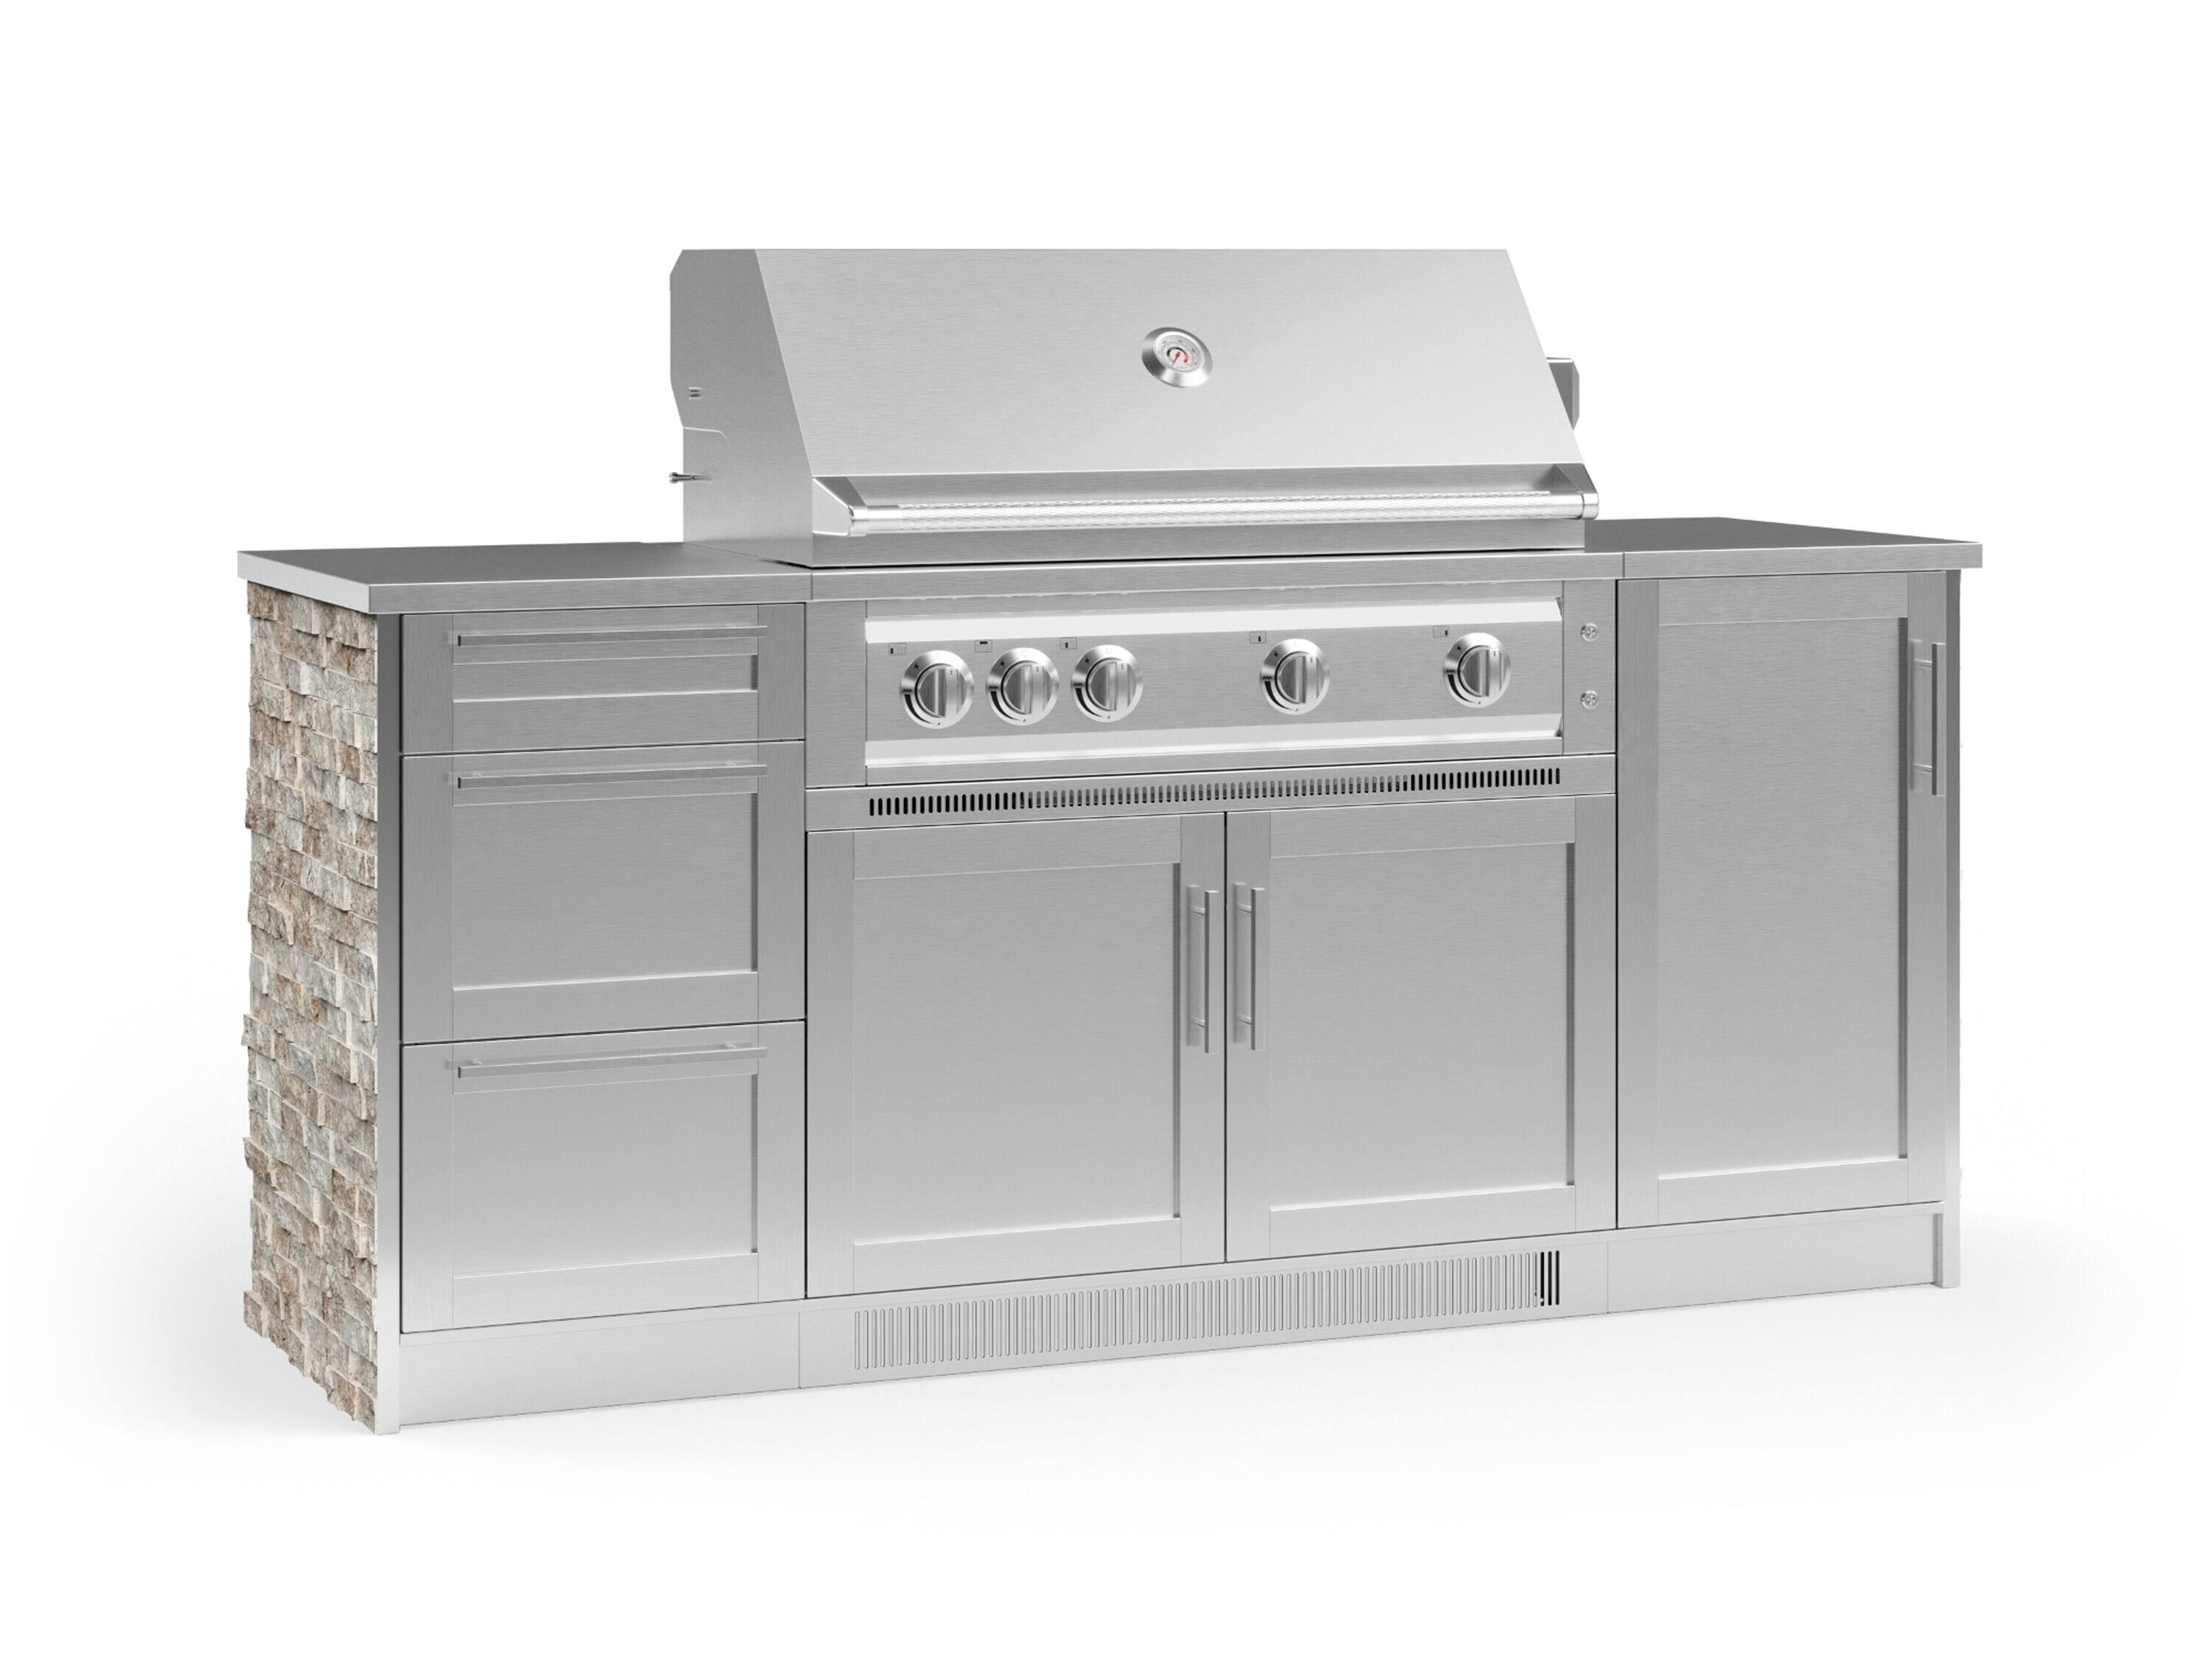 Outdoor Kitchen Set With 5 Burners